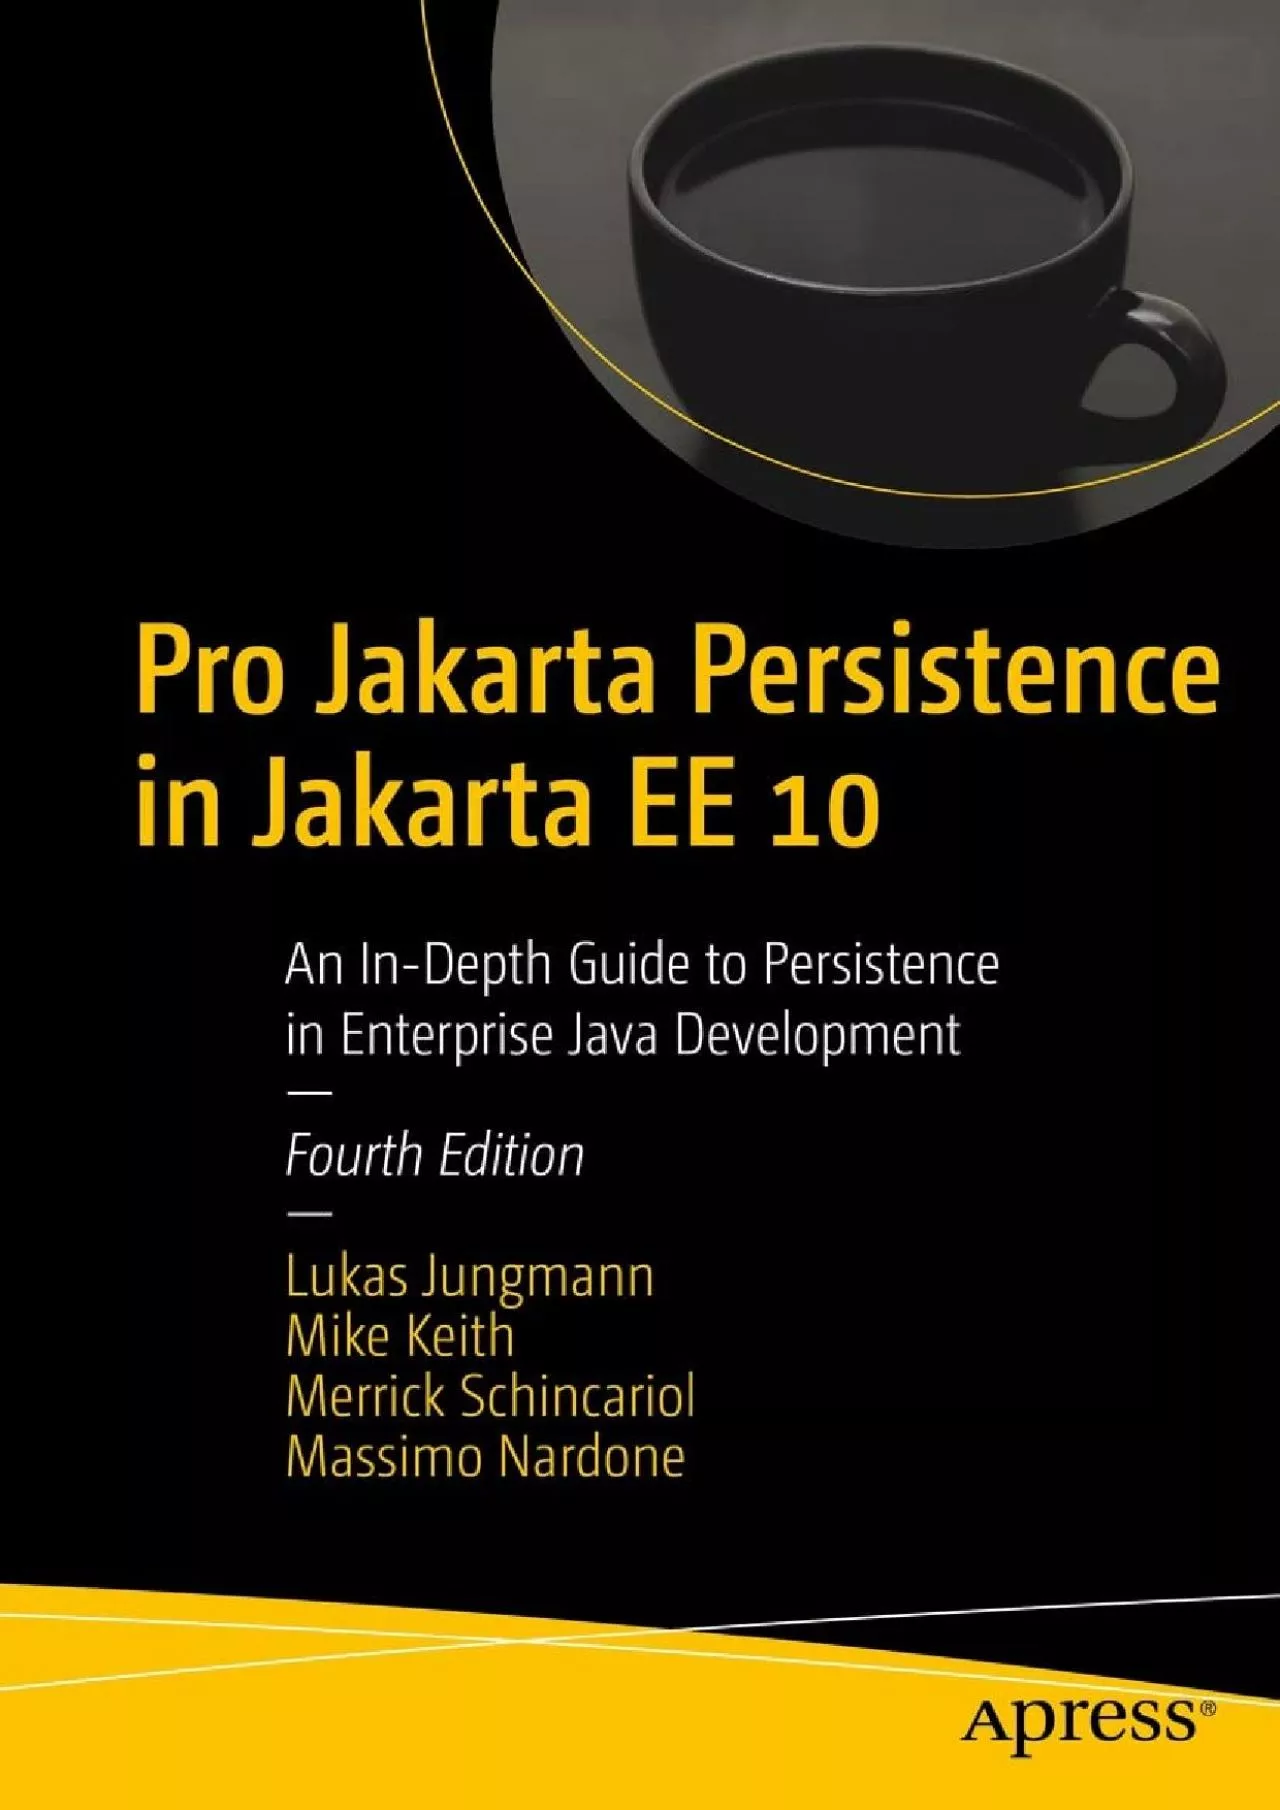 [DOWLOAD]-Pro Jakarta Persistence in Jakarta EE 10: An In-Depth Guide to Persistence in